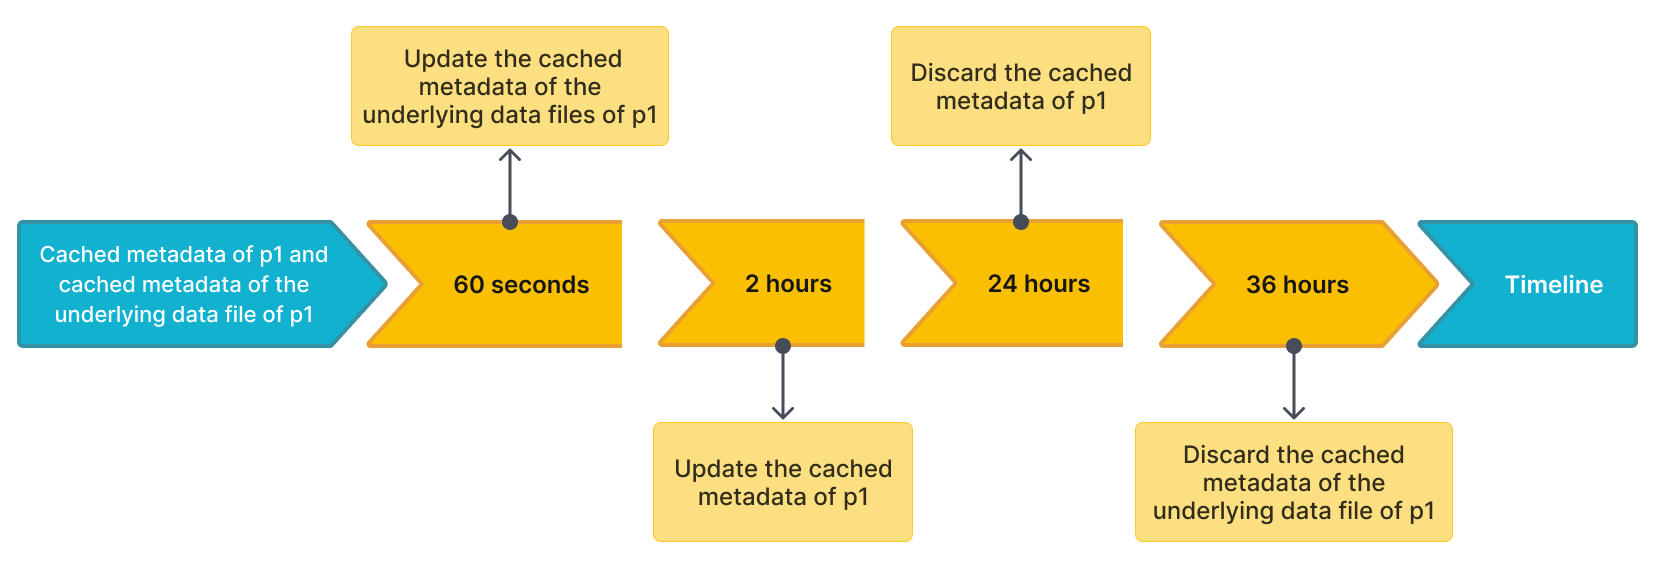 Timeline for updating and discarding cached metadata